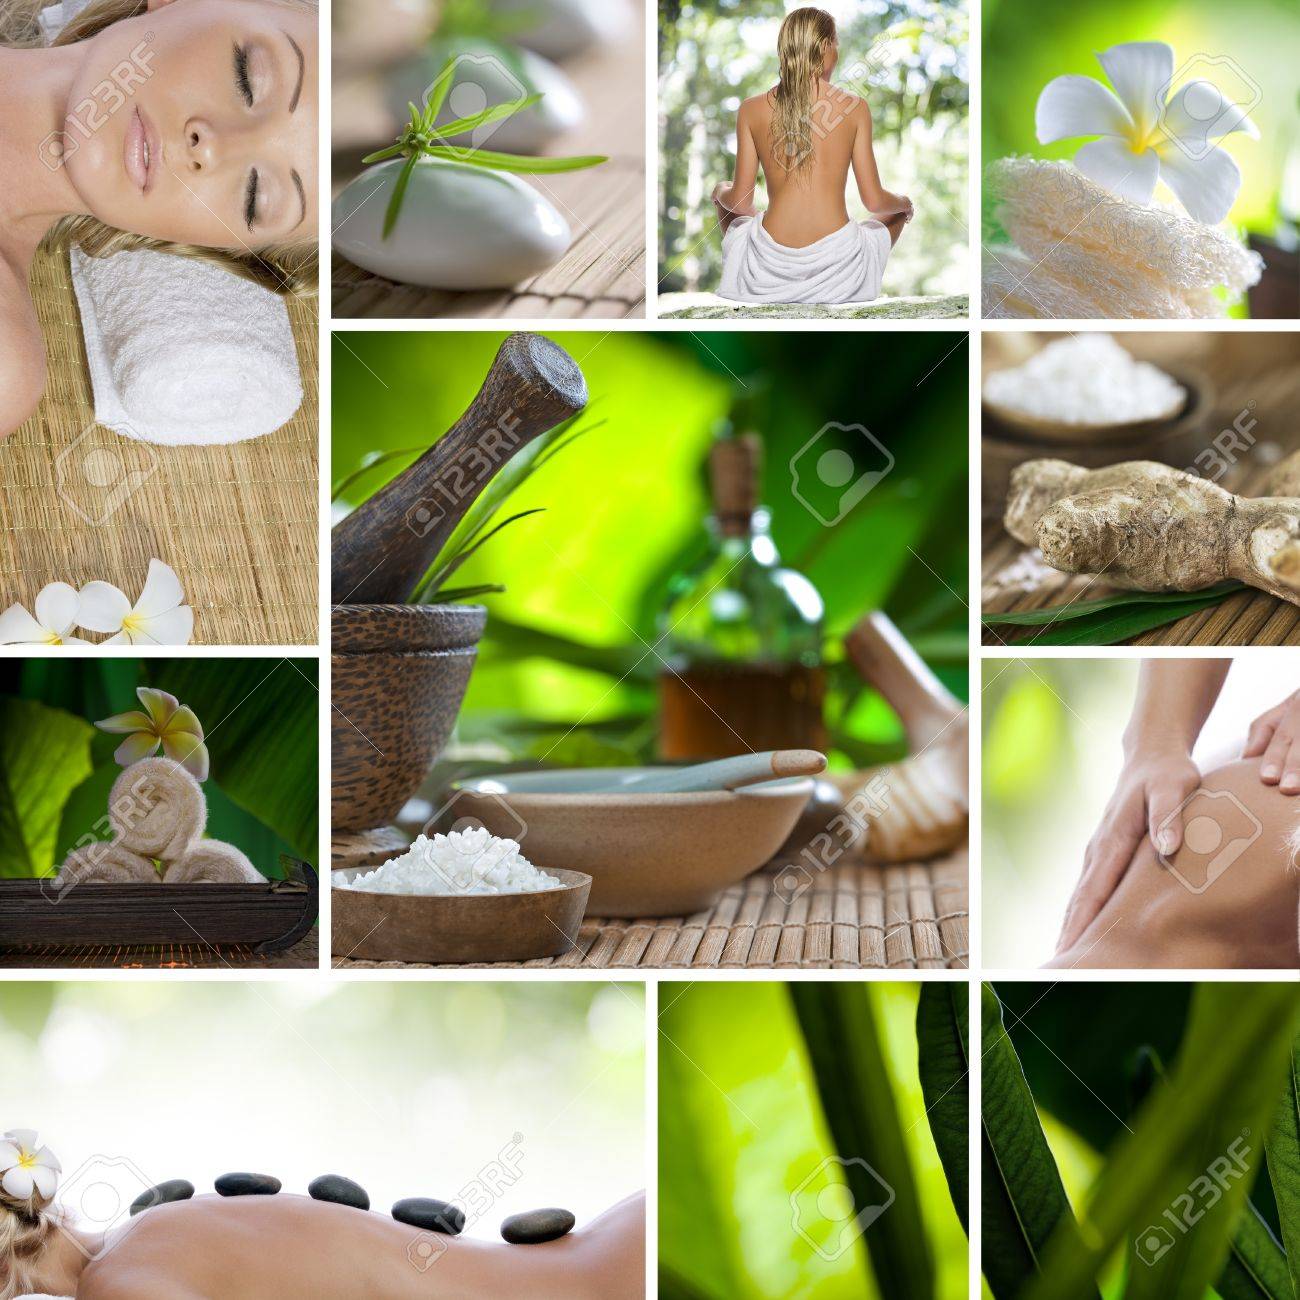 8378047-Spa-theme-collage-composed-of-different-images-Stock-Photo-spa-massage-beauty.jpg